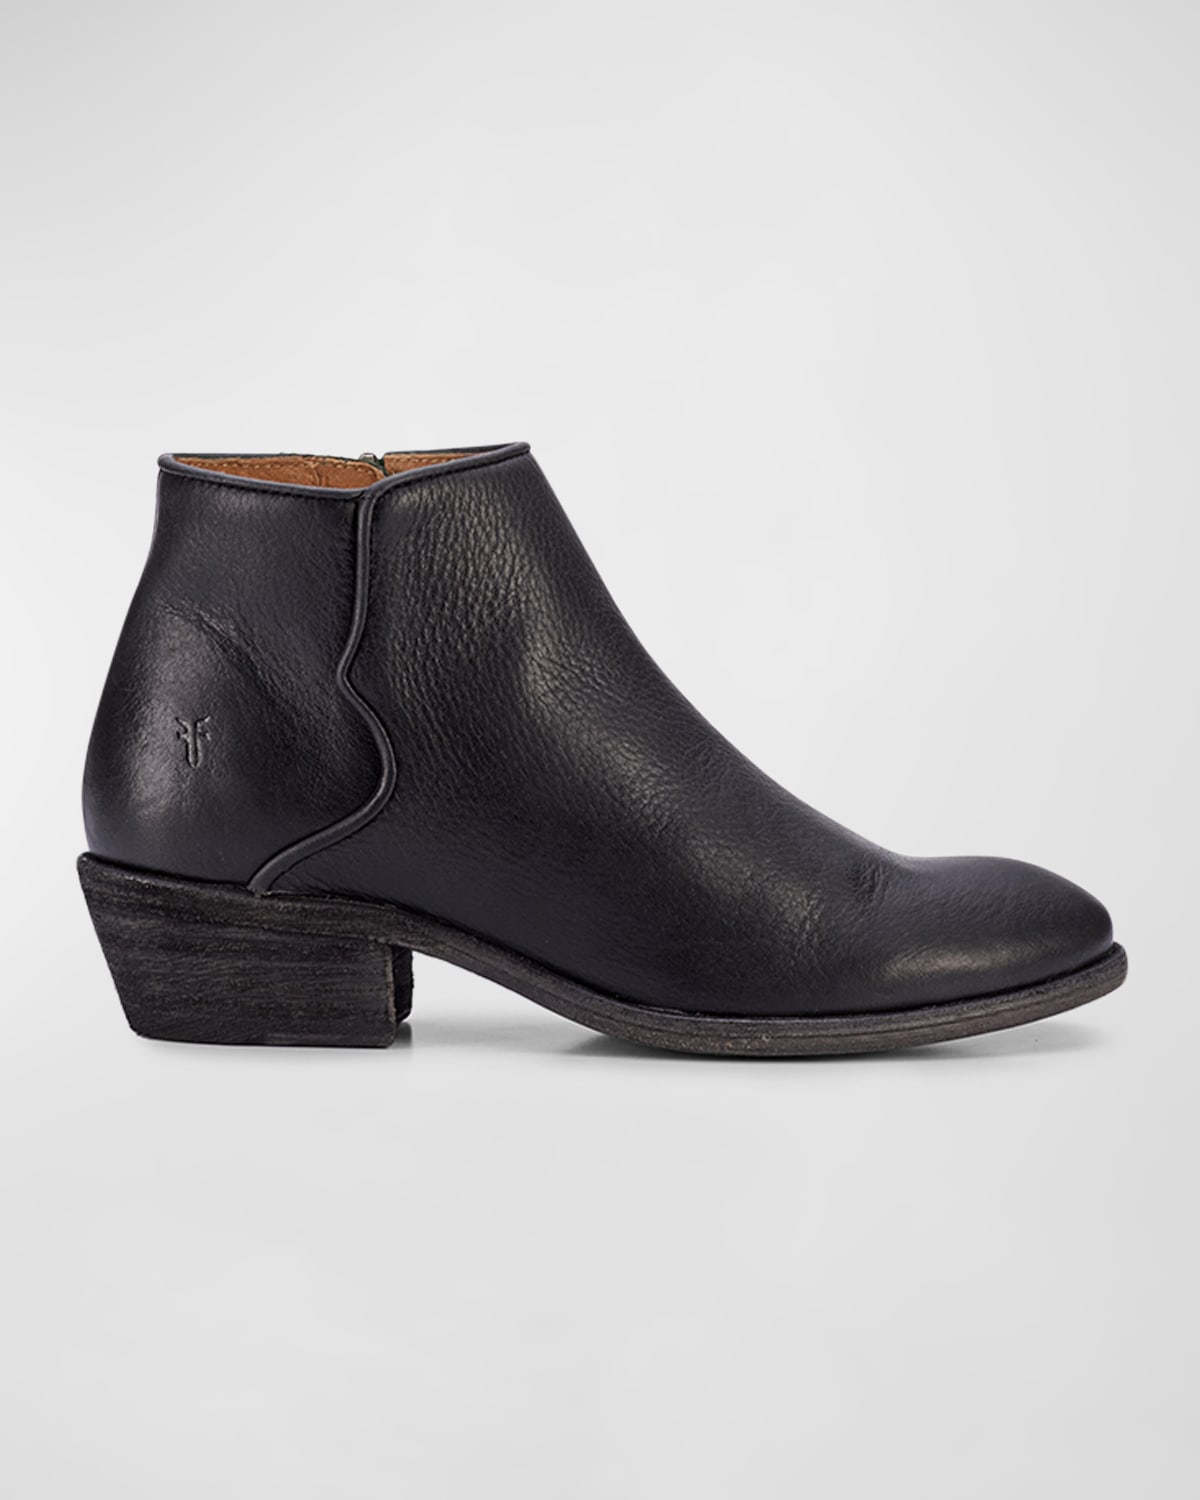 Carson Leather Piping Zip Booties